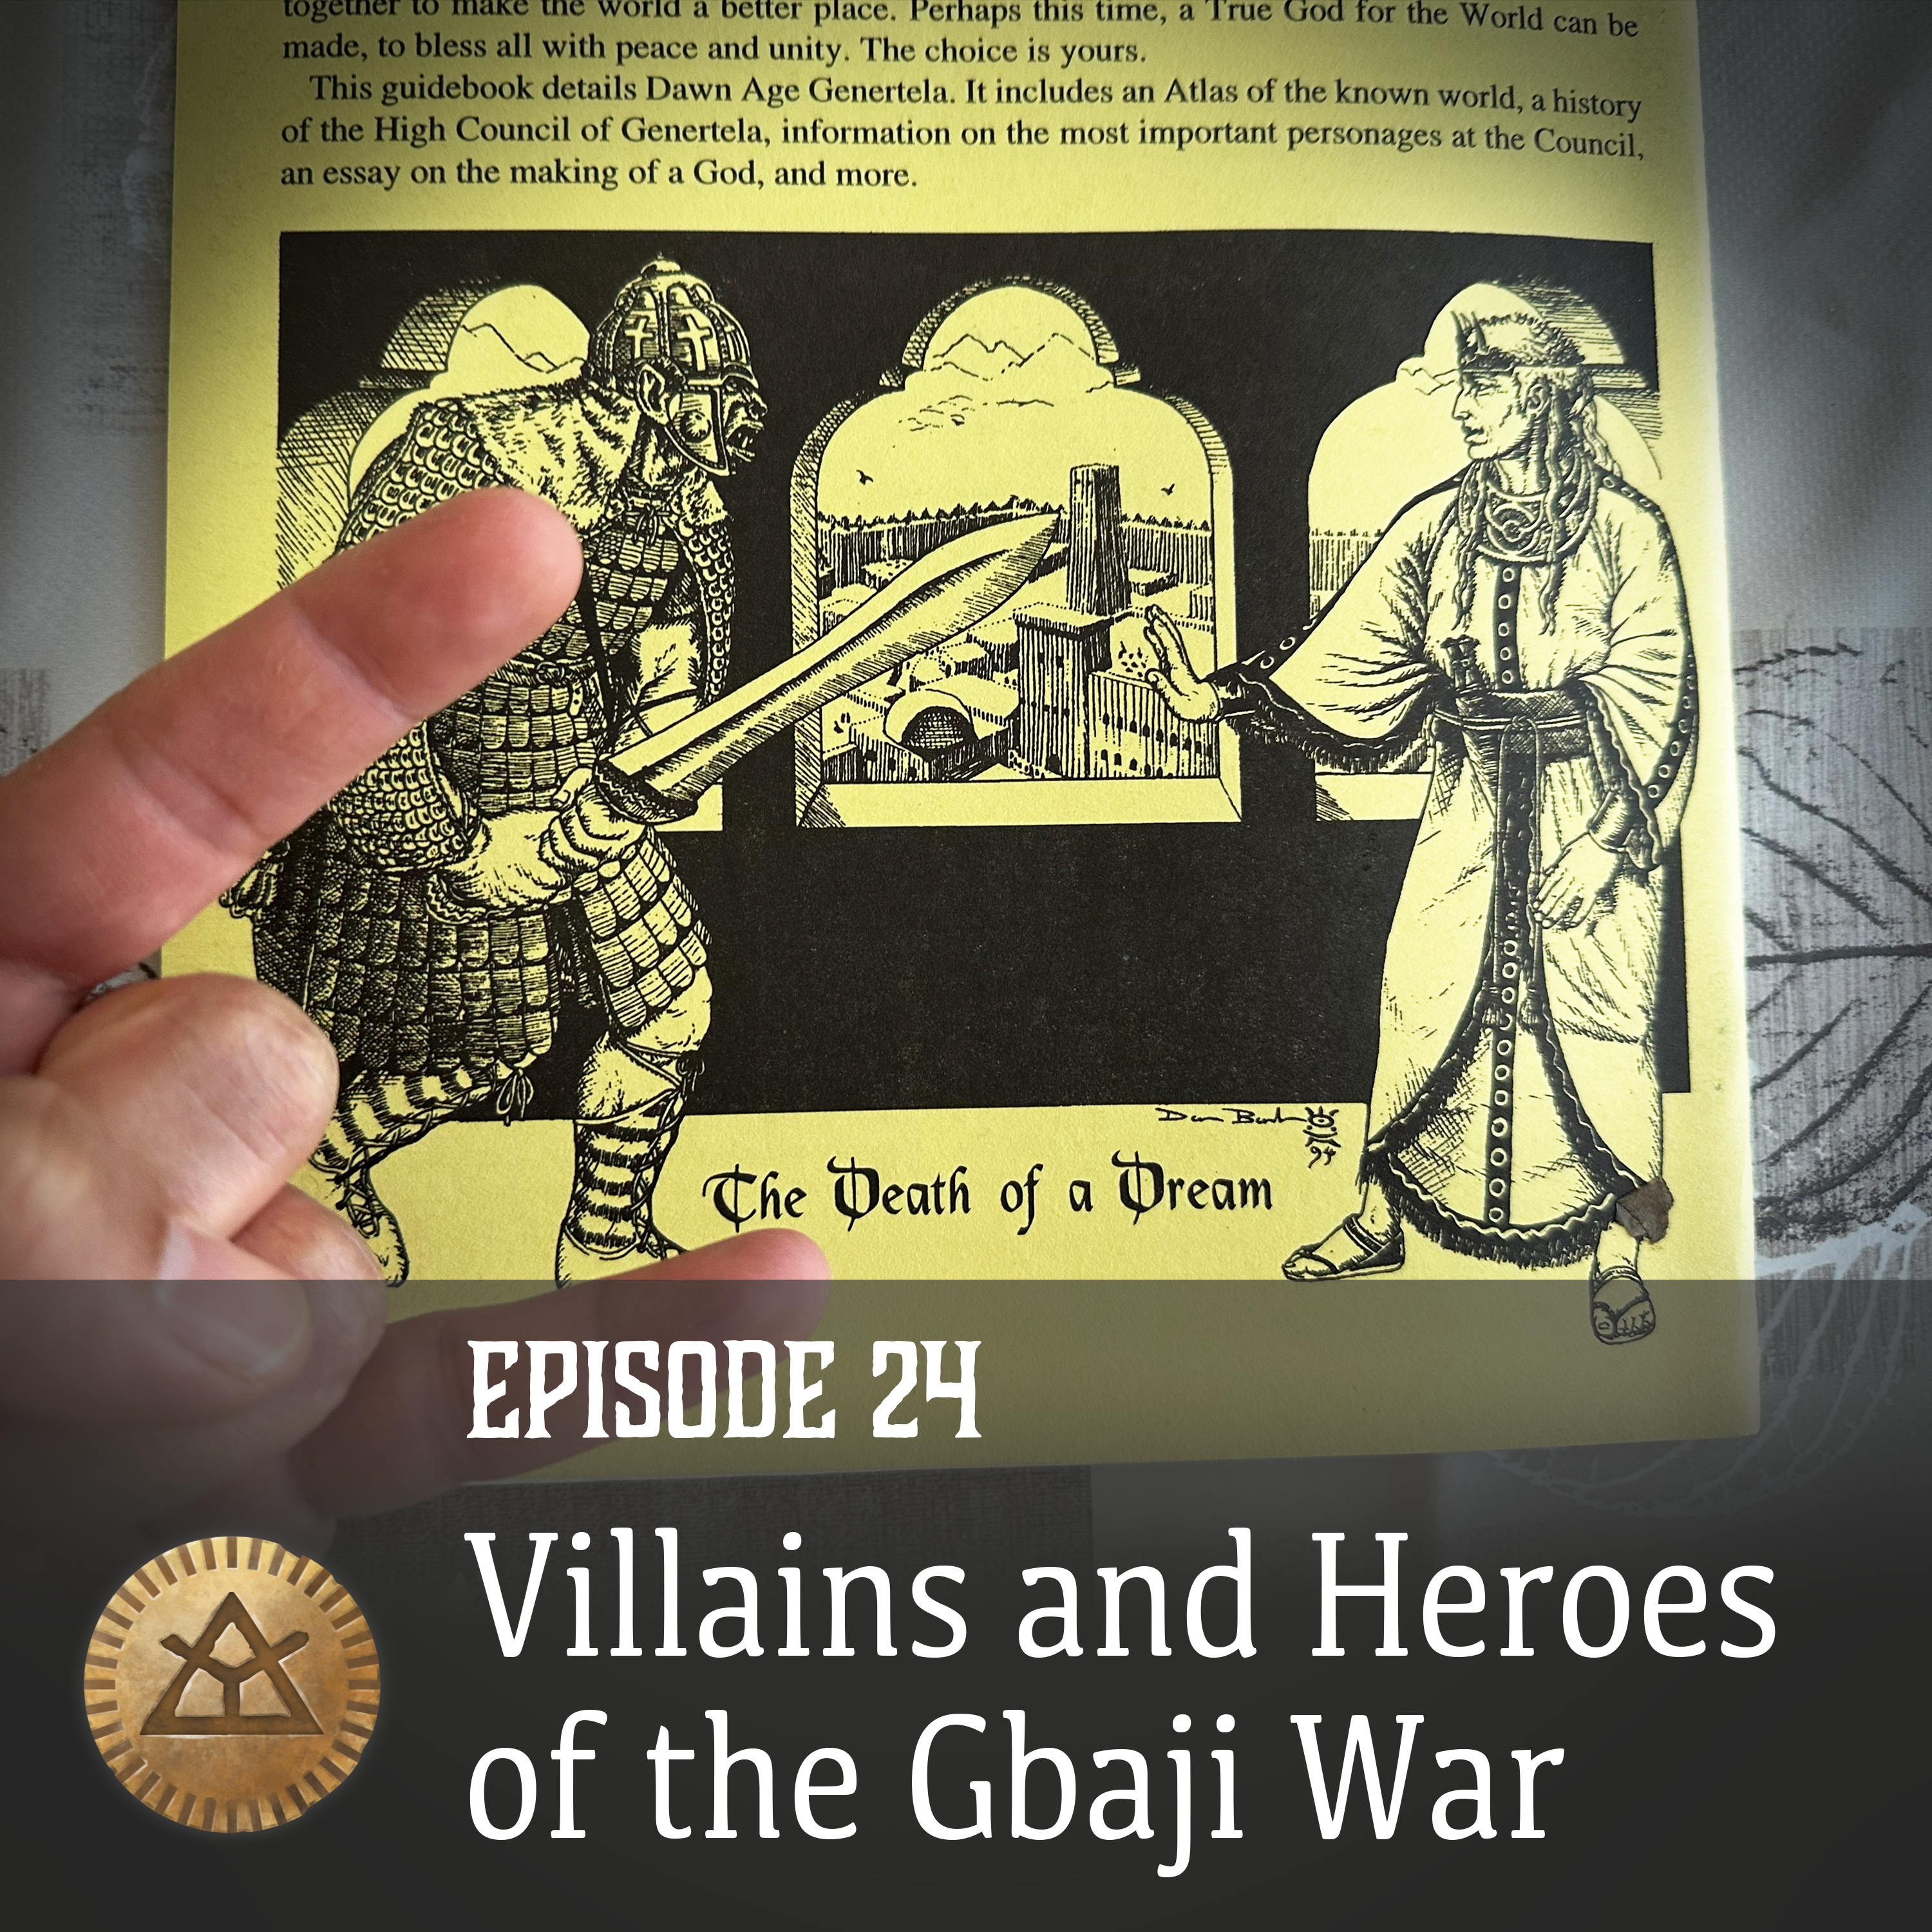 Episode 24: Villains and Heroes of the Gbaji War